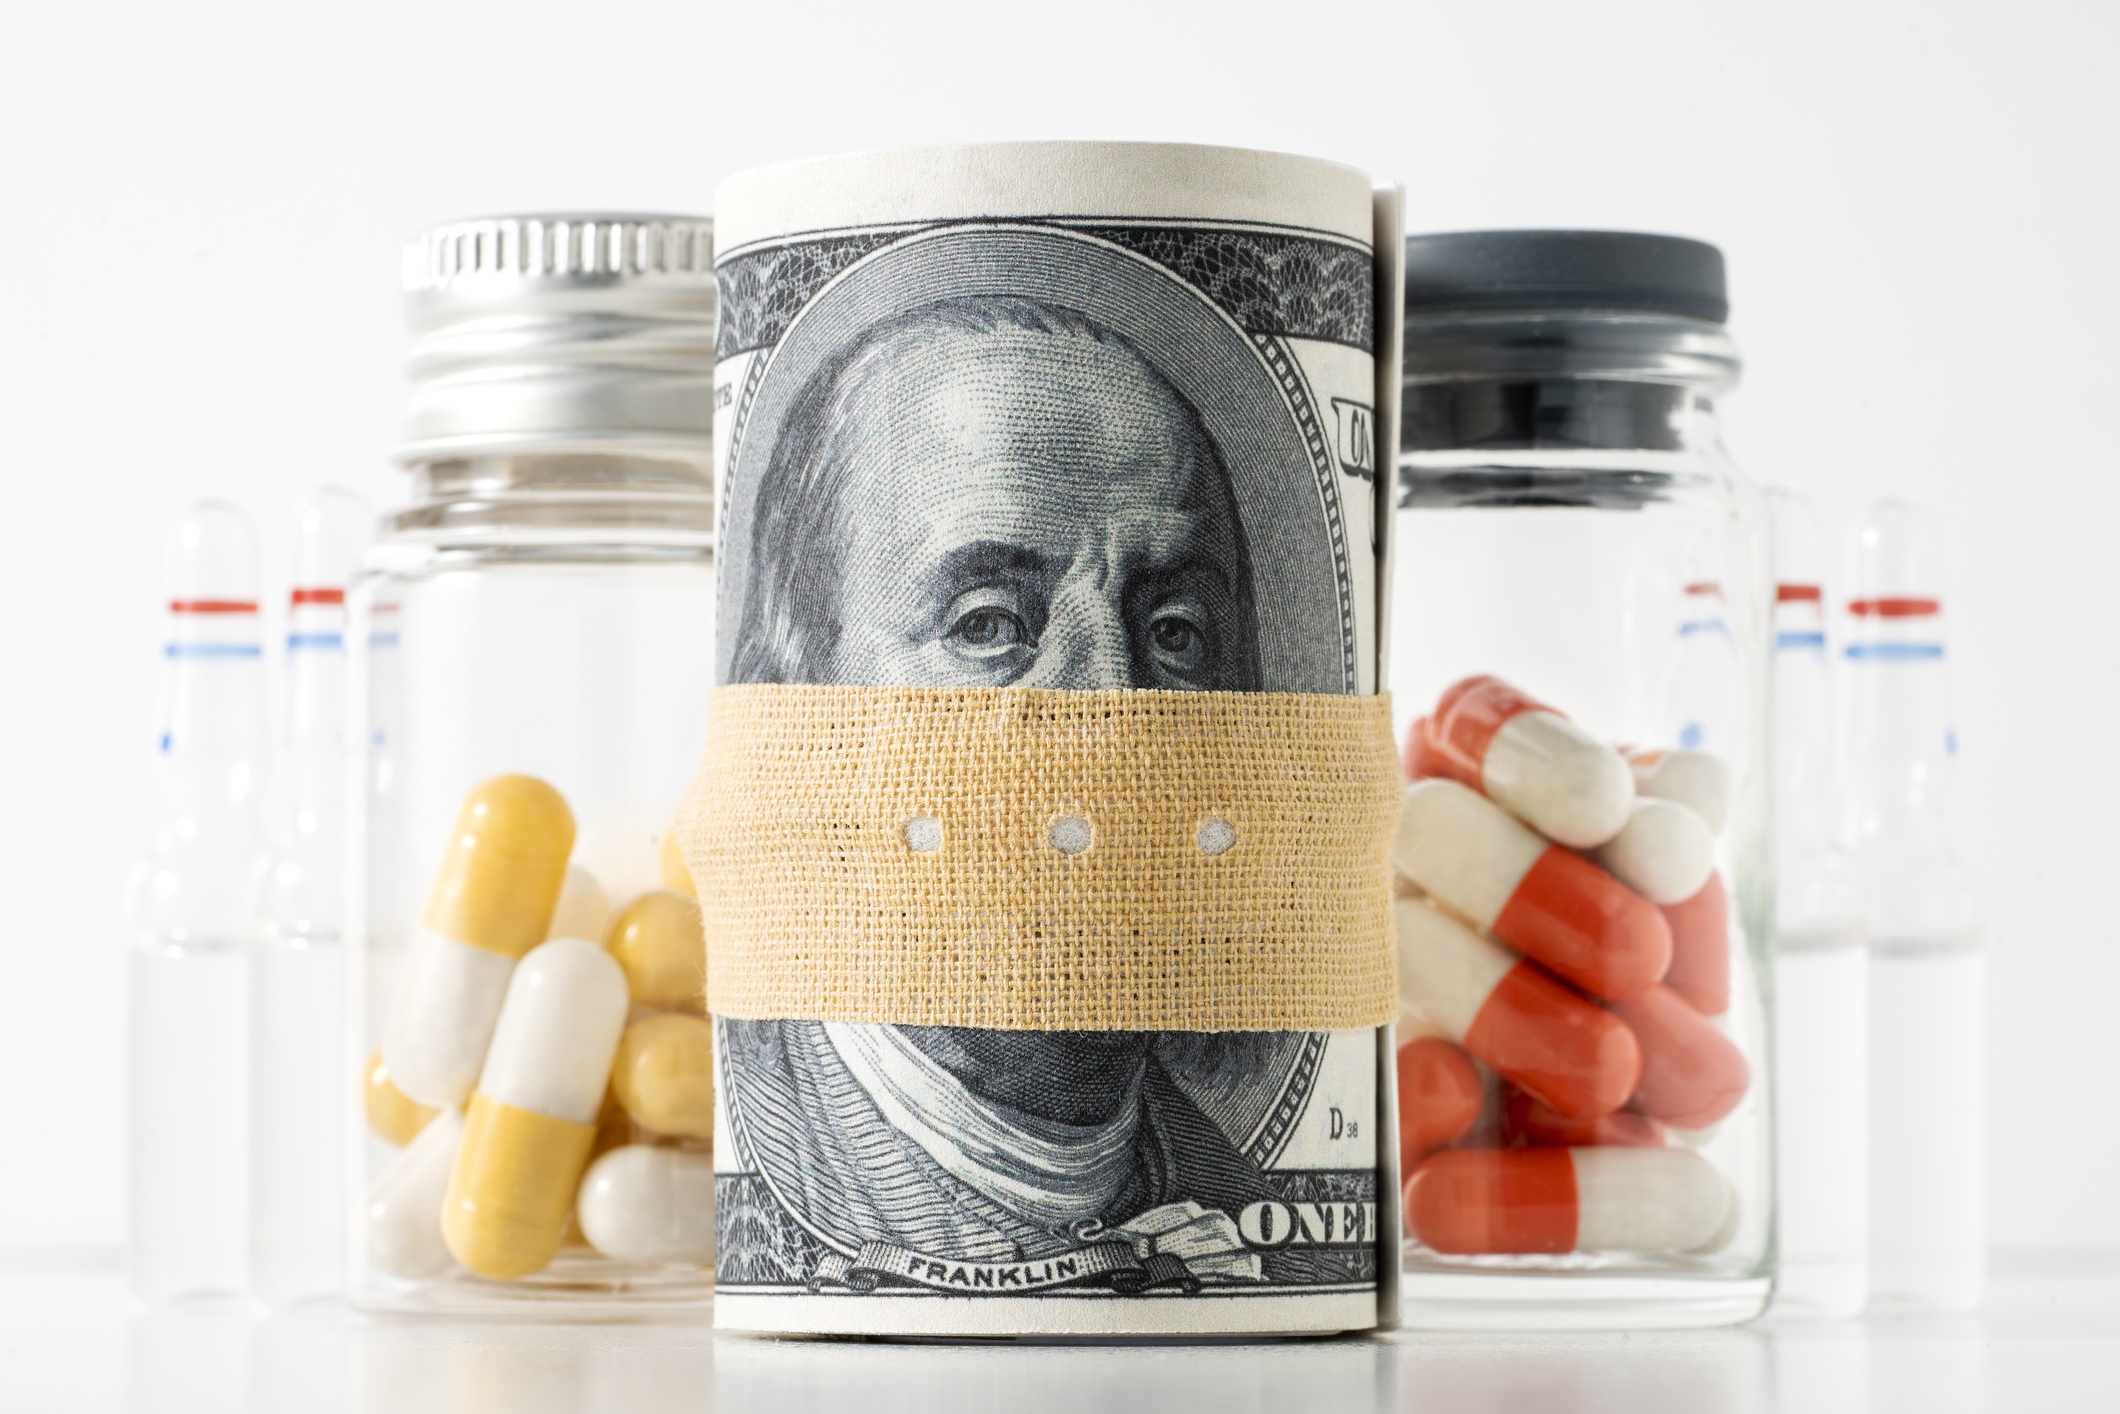 CMS will effectively limit the cost of 10 prescription drugs once the drug companies and federal regulators agree to a new pr